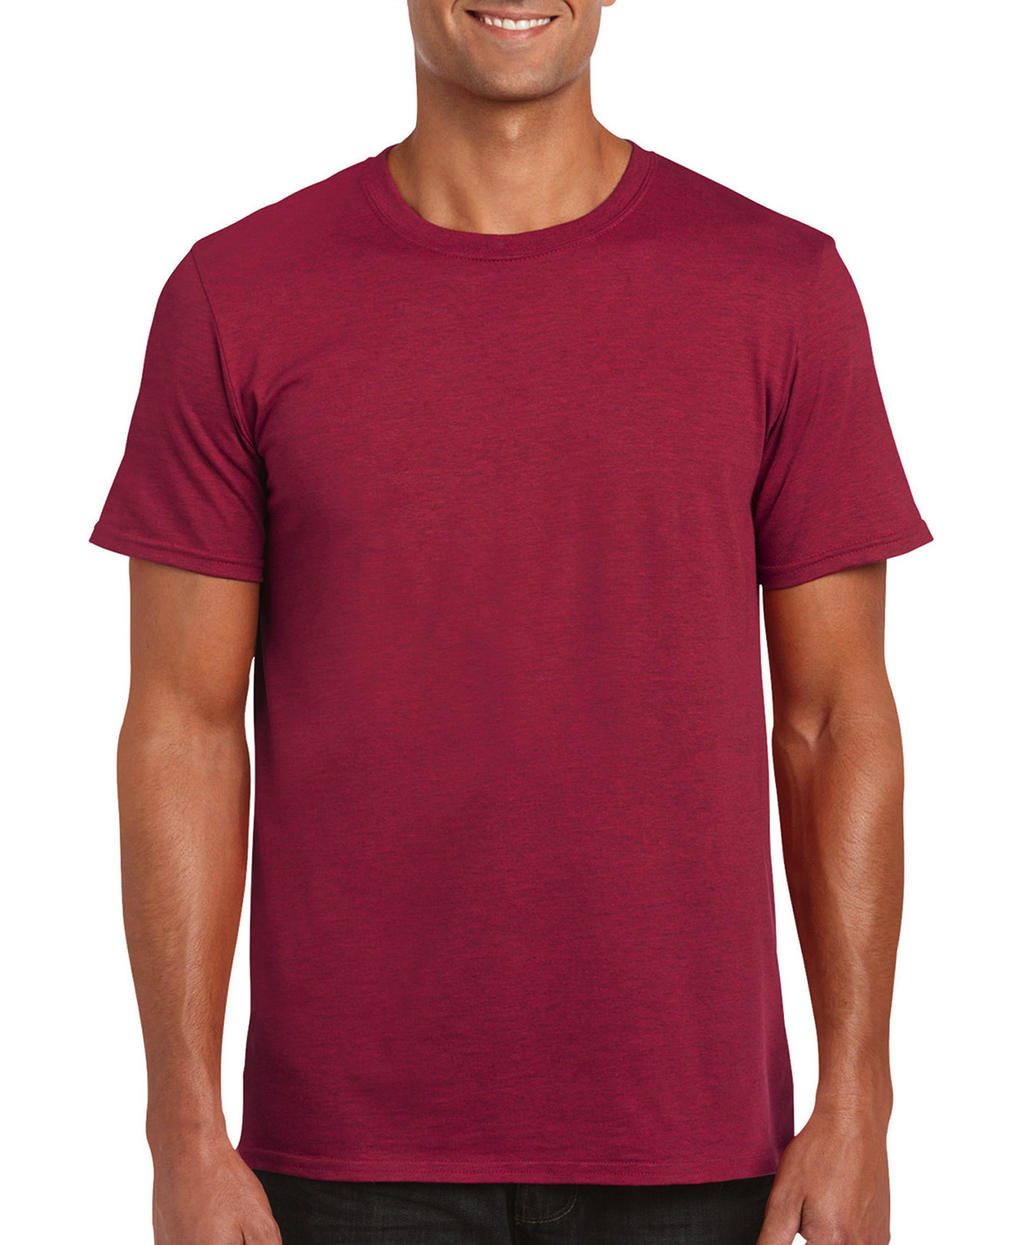  Softstyle? Ring Spun T-Shirt in Farbe Antique Cherry Red